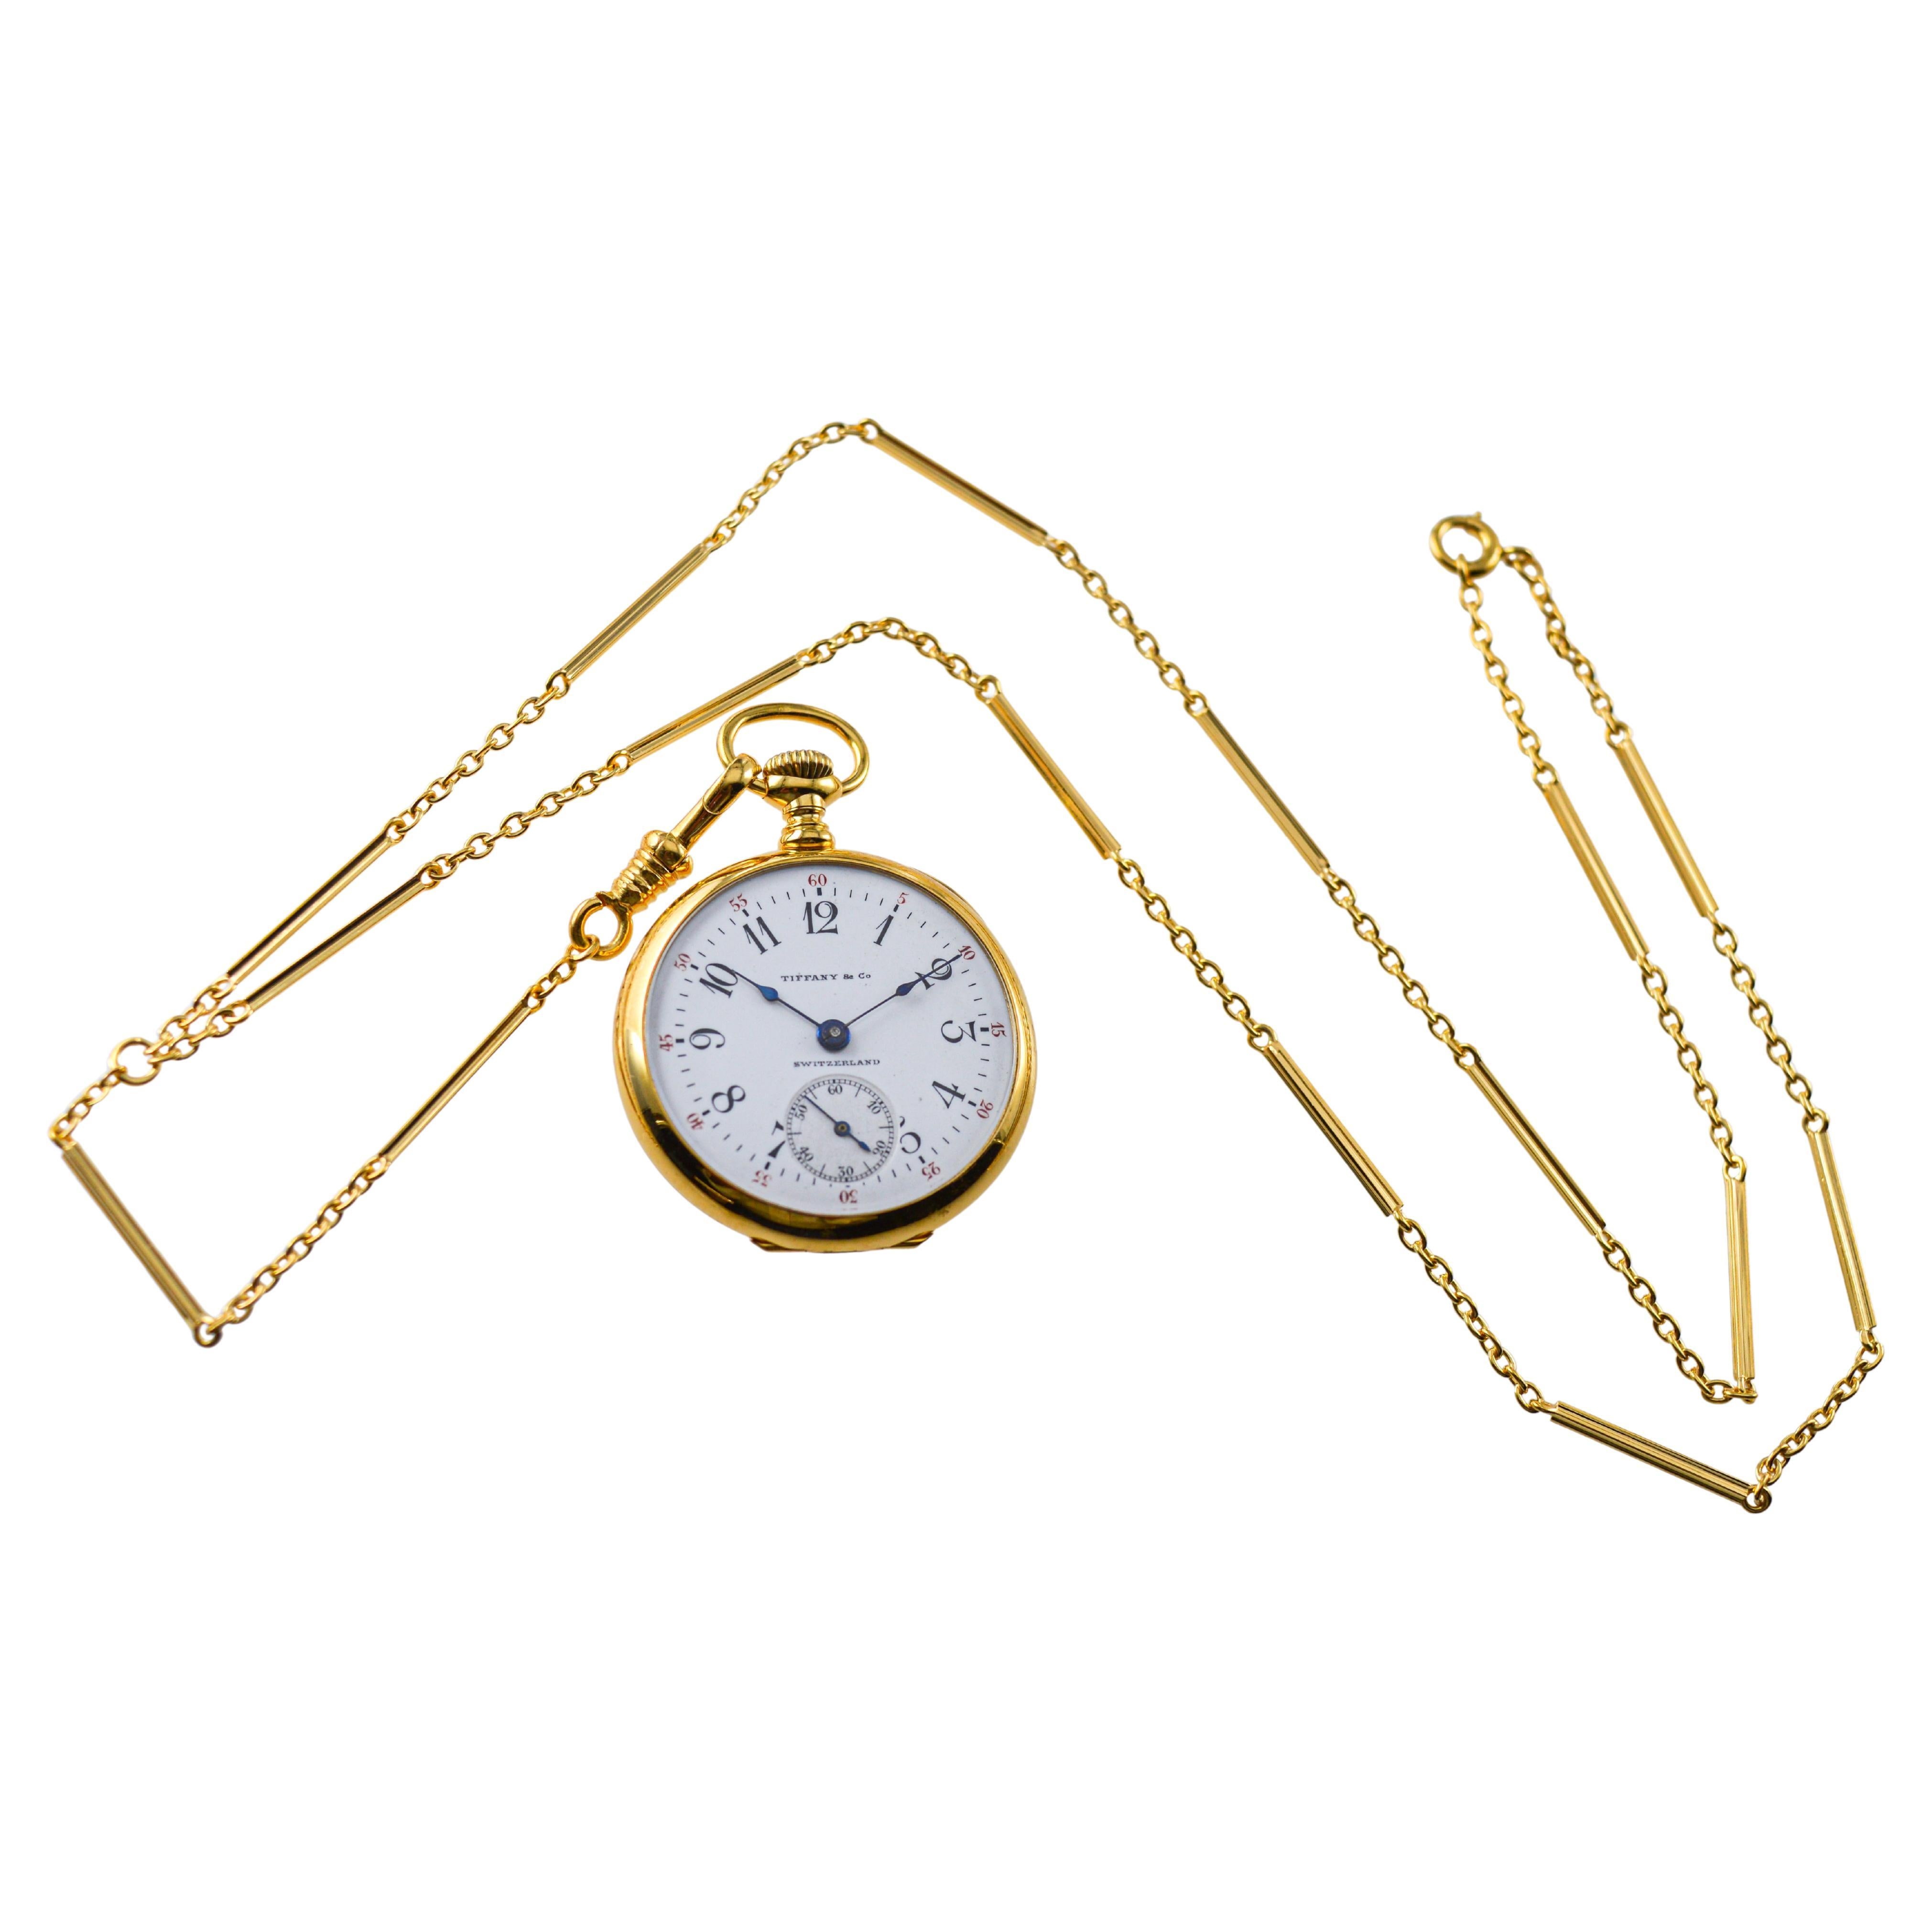 Tiffany & Co 18Kt Gold Pendant Watch with Gold Chain from 1912 Enamel Dial For Sale